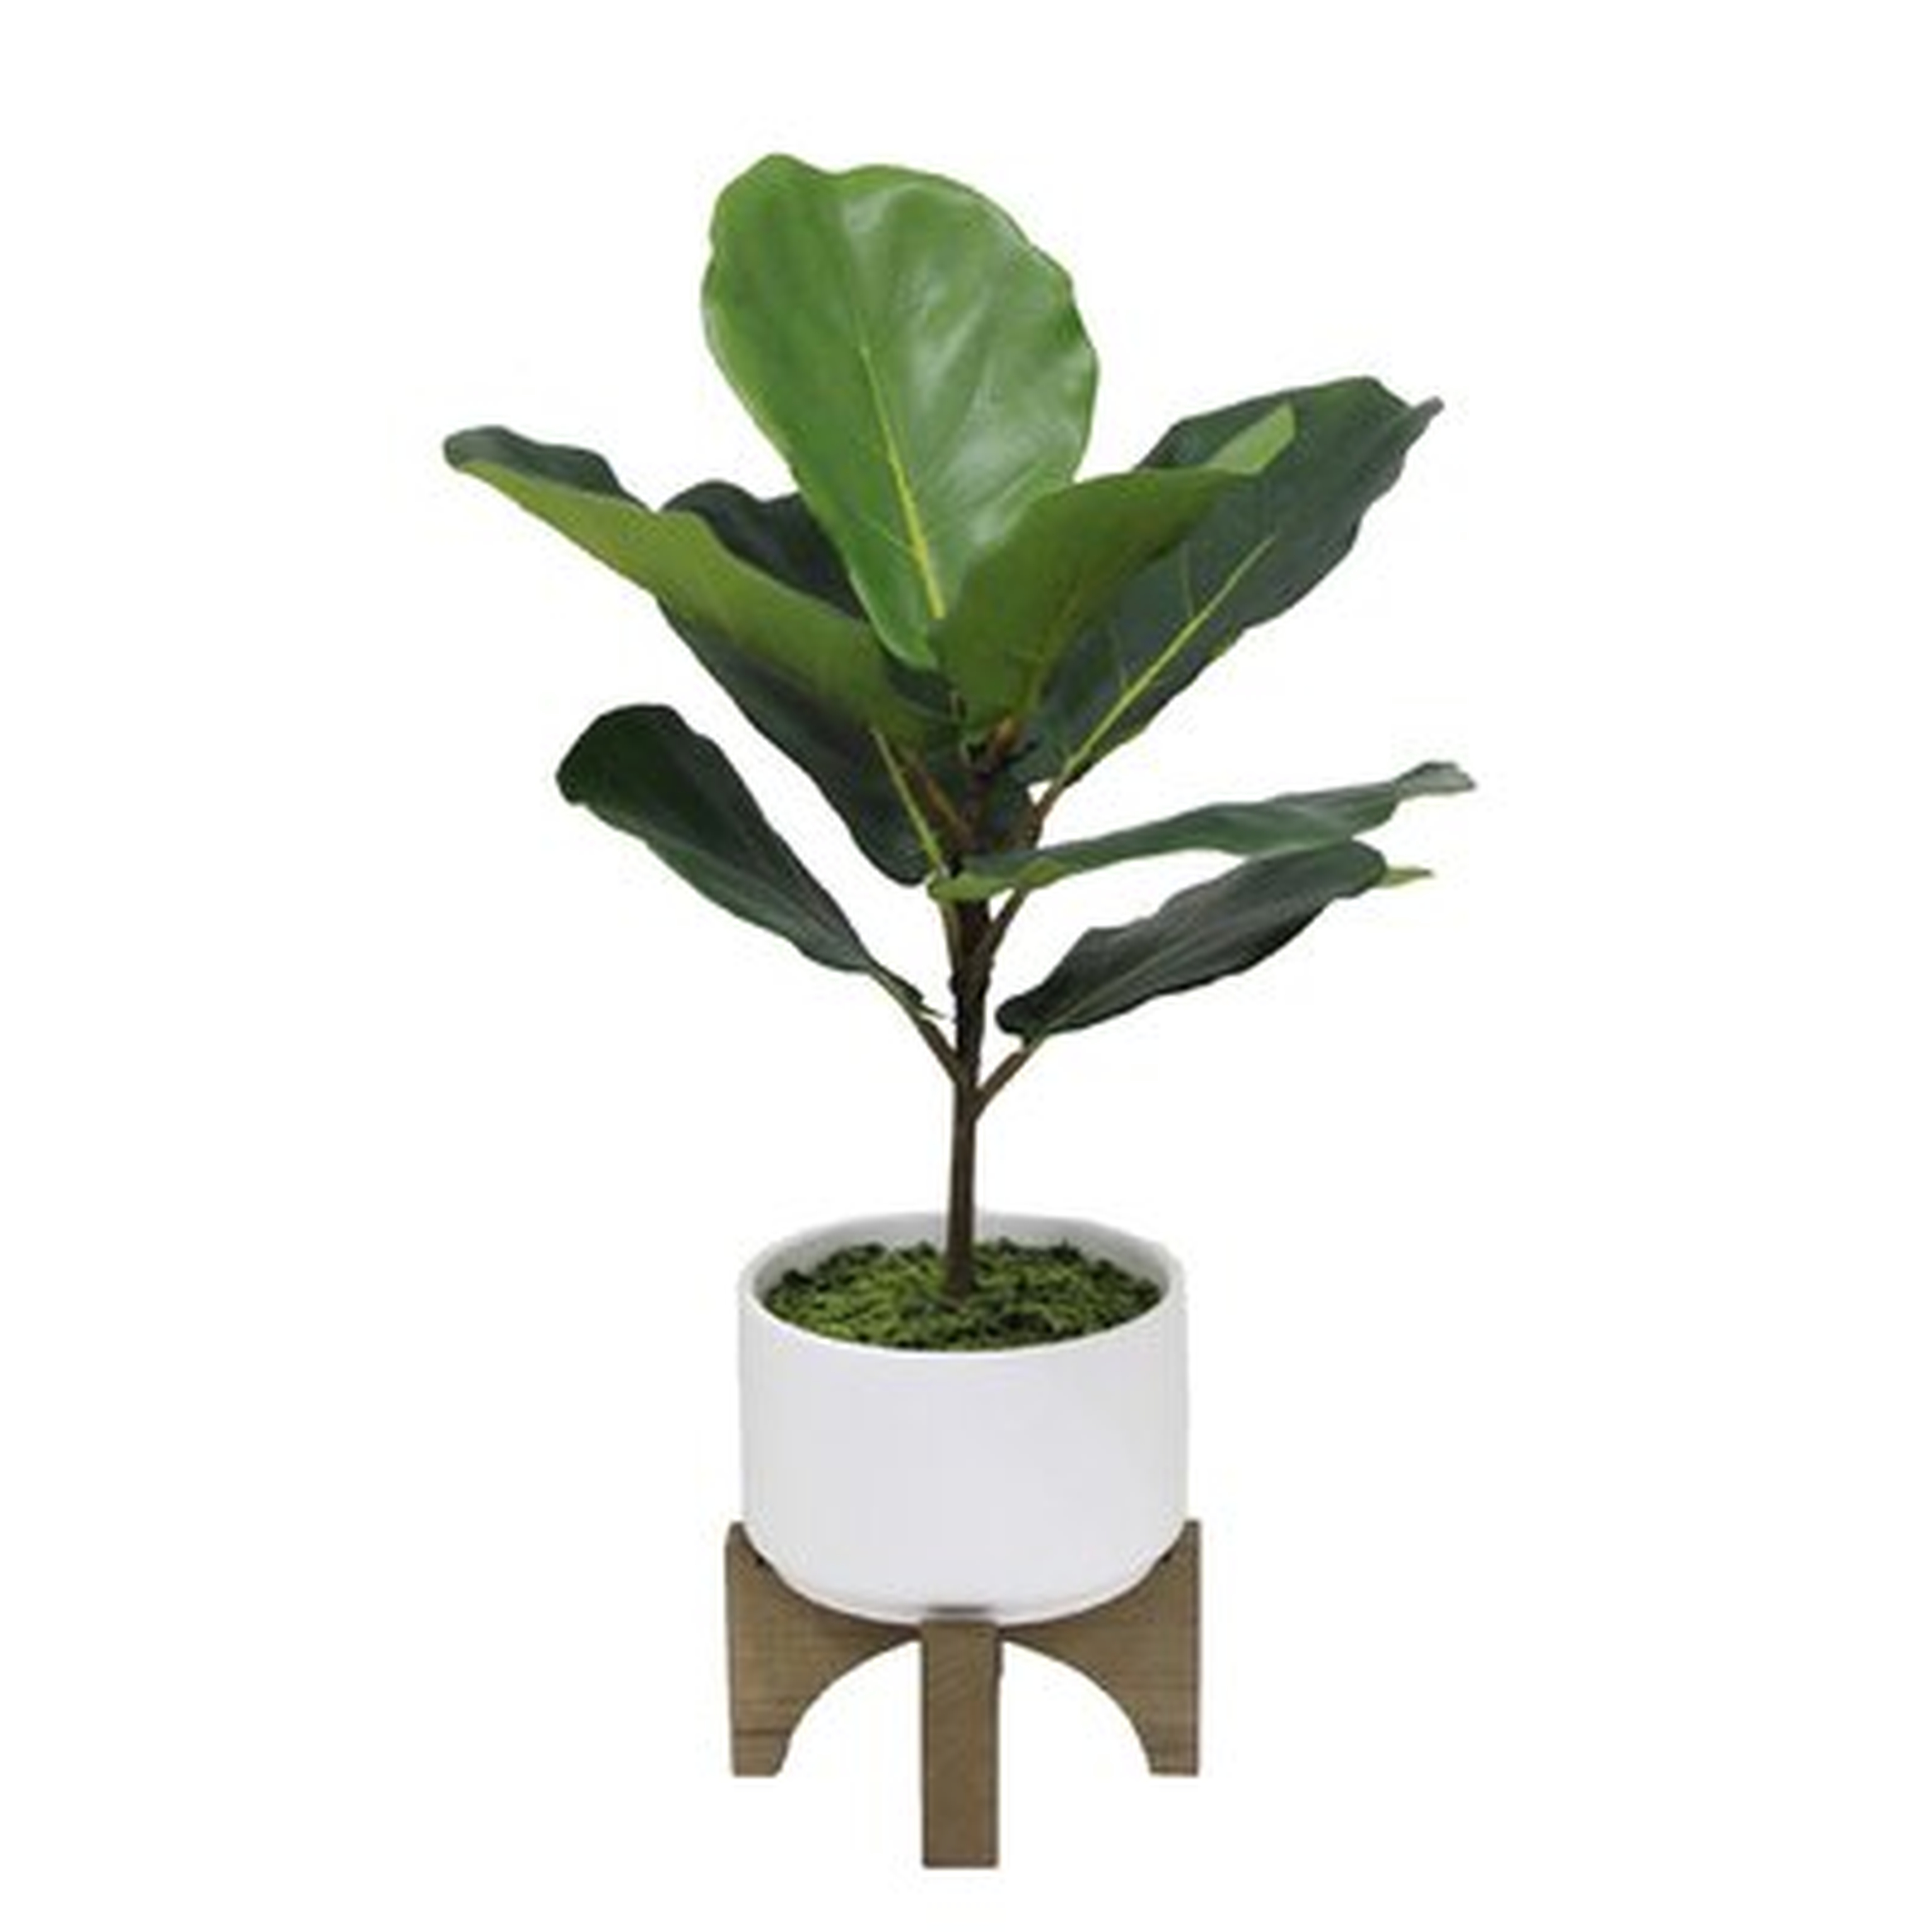 23" Tall Fiddle Leaf  In Ceramic Planter On Wood Stand,White - Wayfair